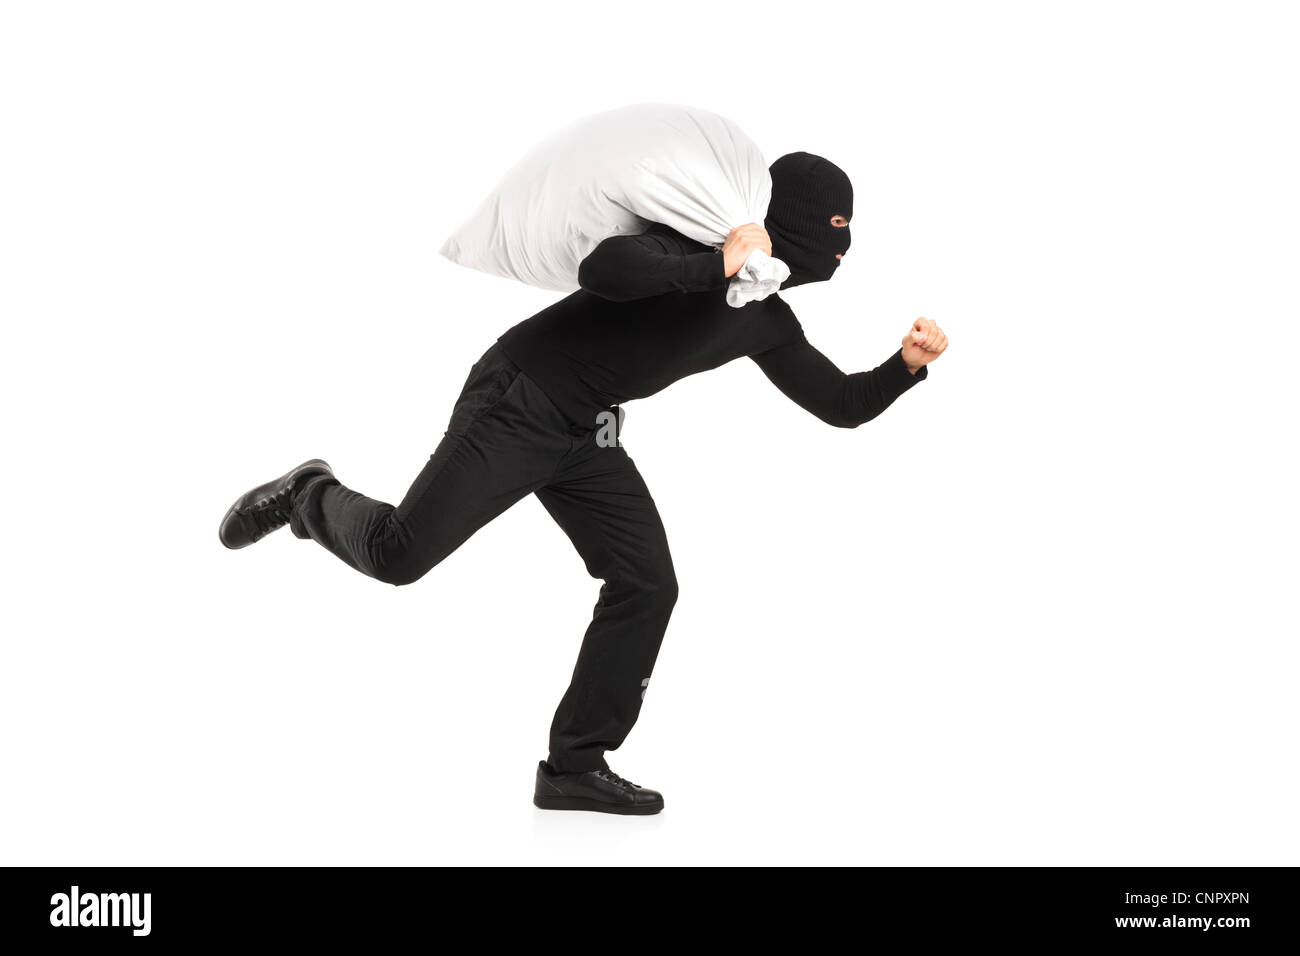 Thief carrying a bag and running away isolated on white background Stock Photo